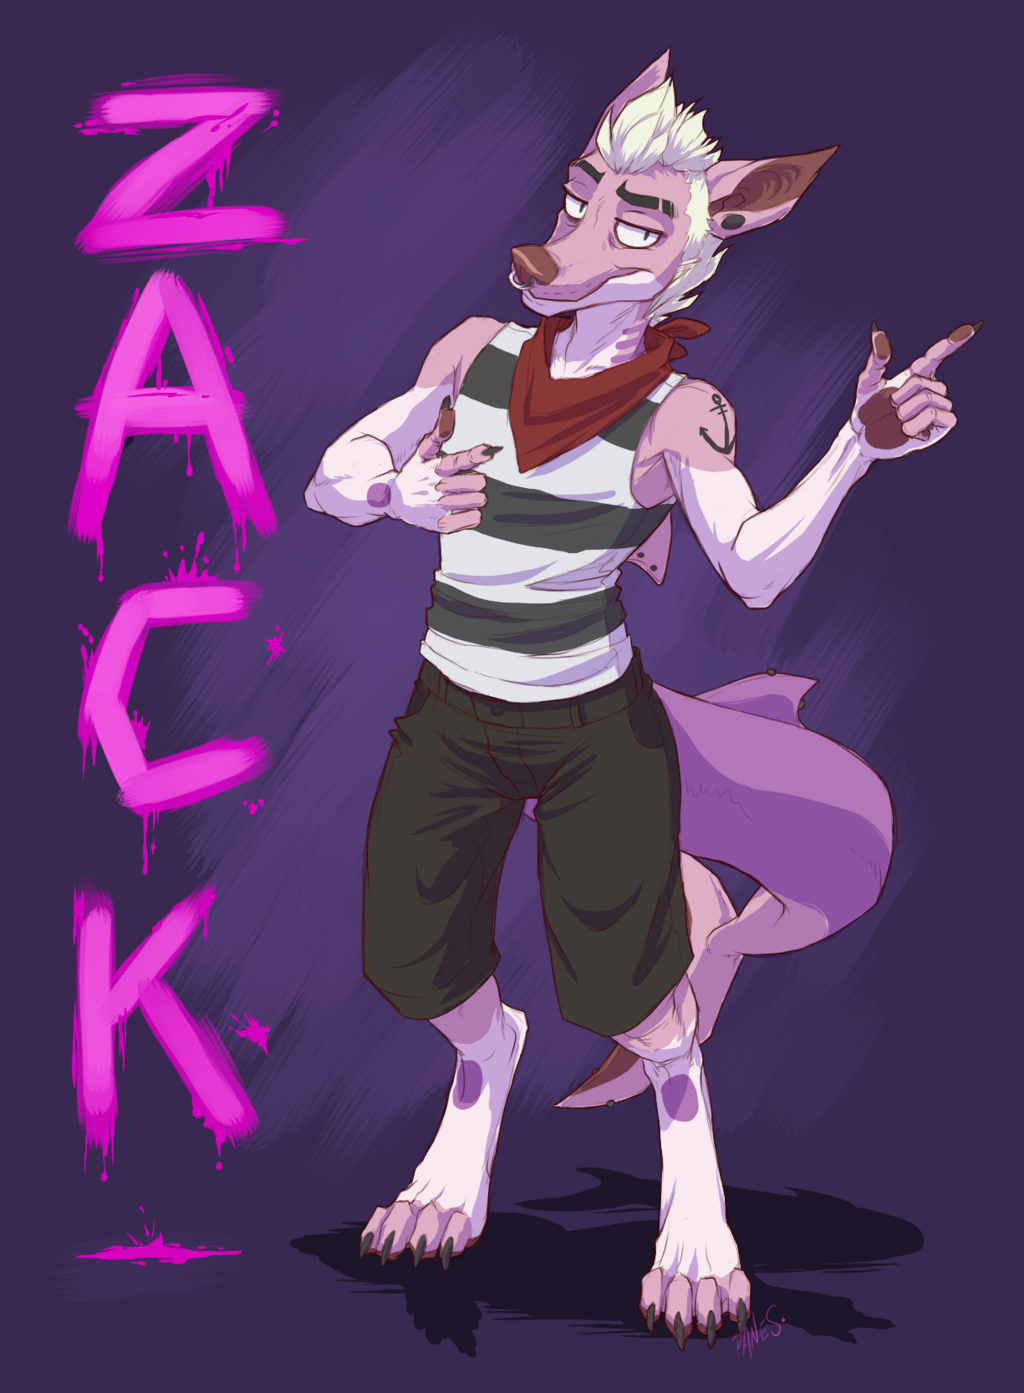 Most recent image: Zack by ugly-dog